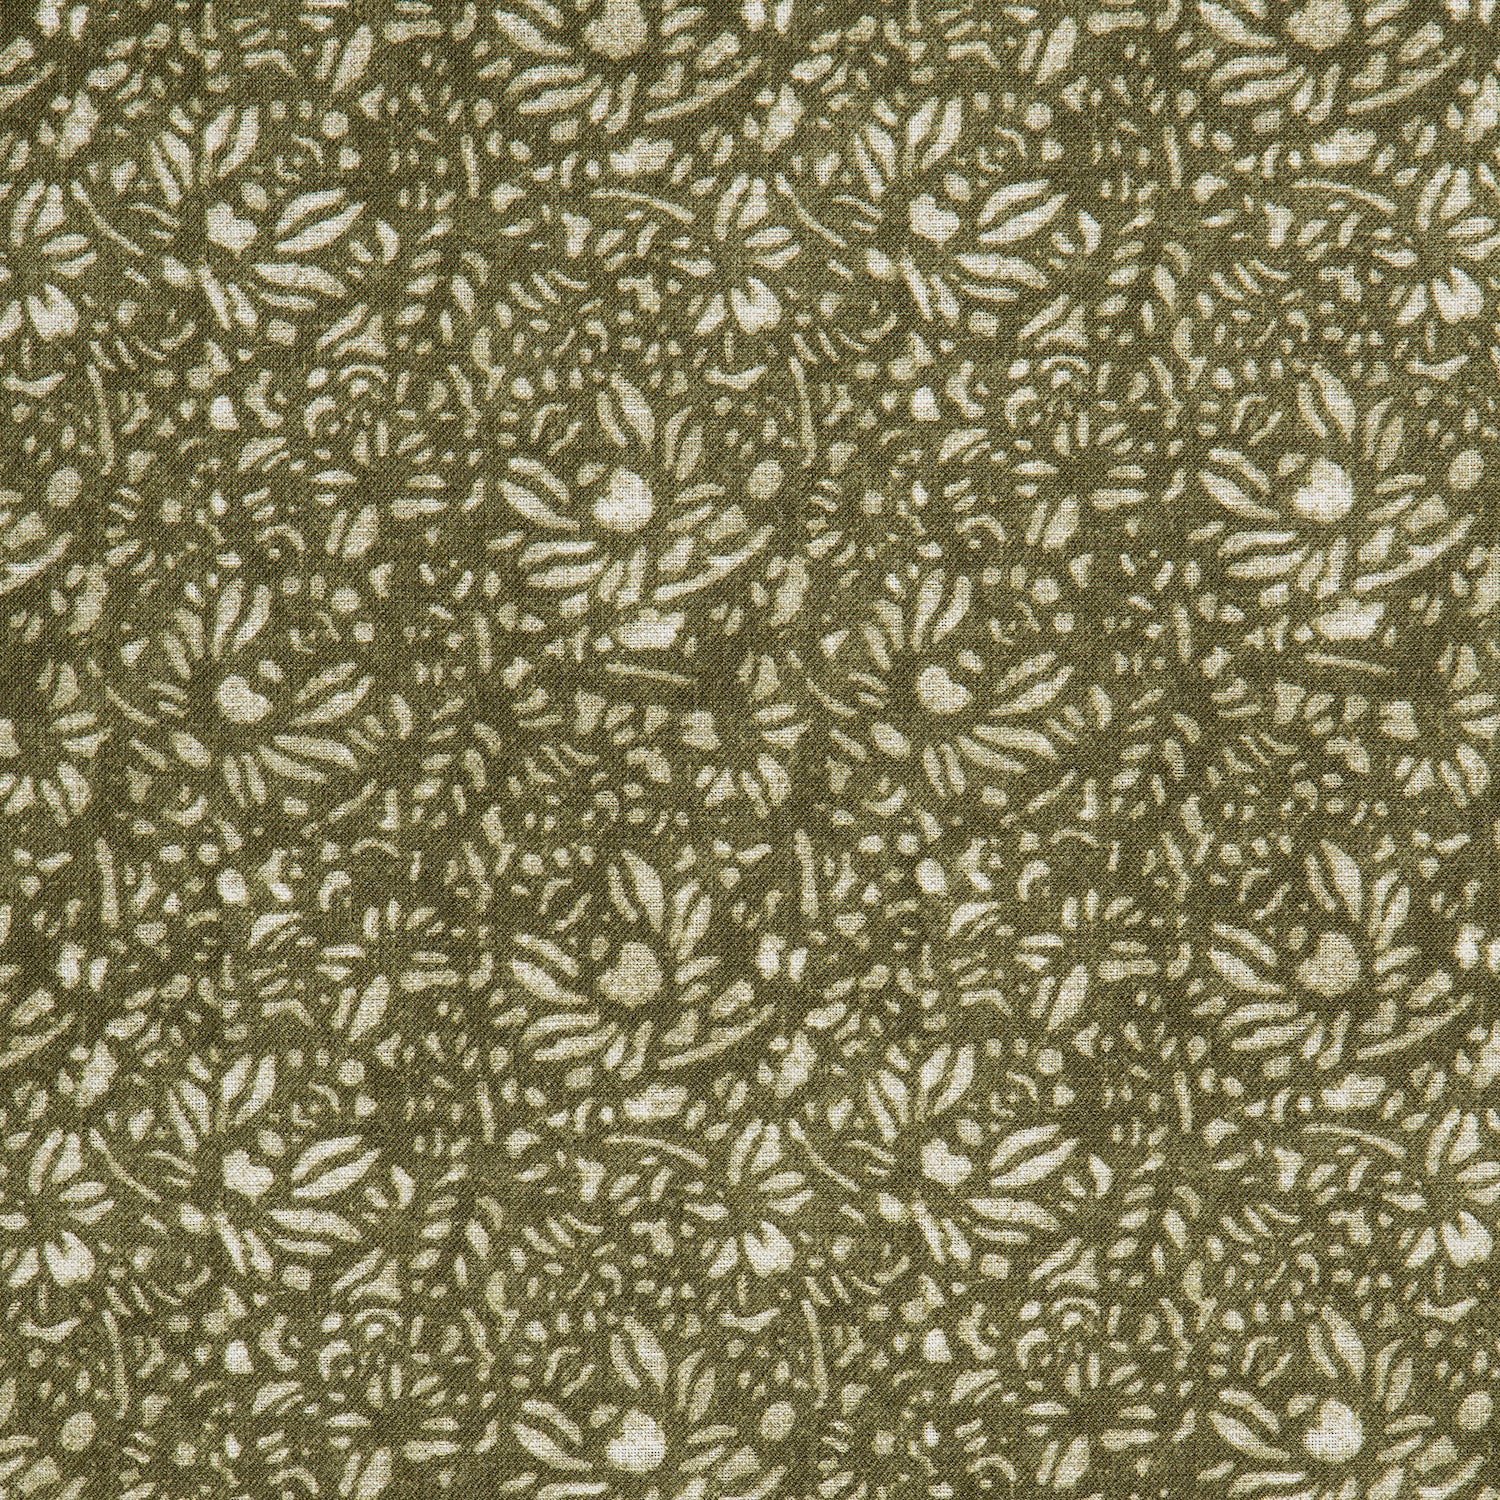 Detail of a printed linen fabric in a repeating chrysanthemum pattern in cream on an olive field.